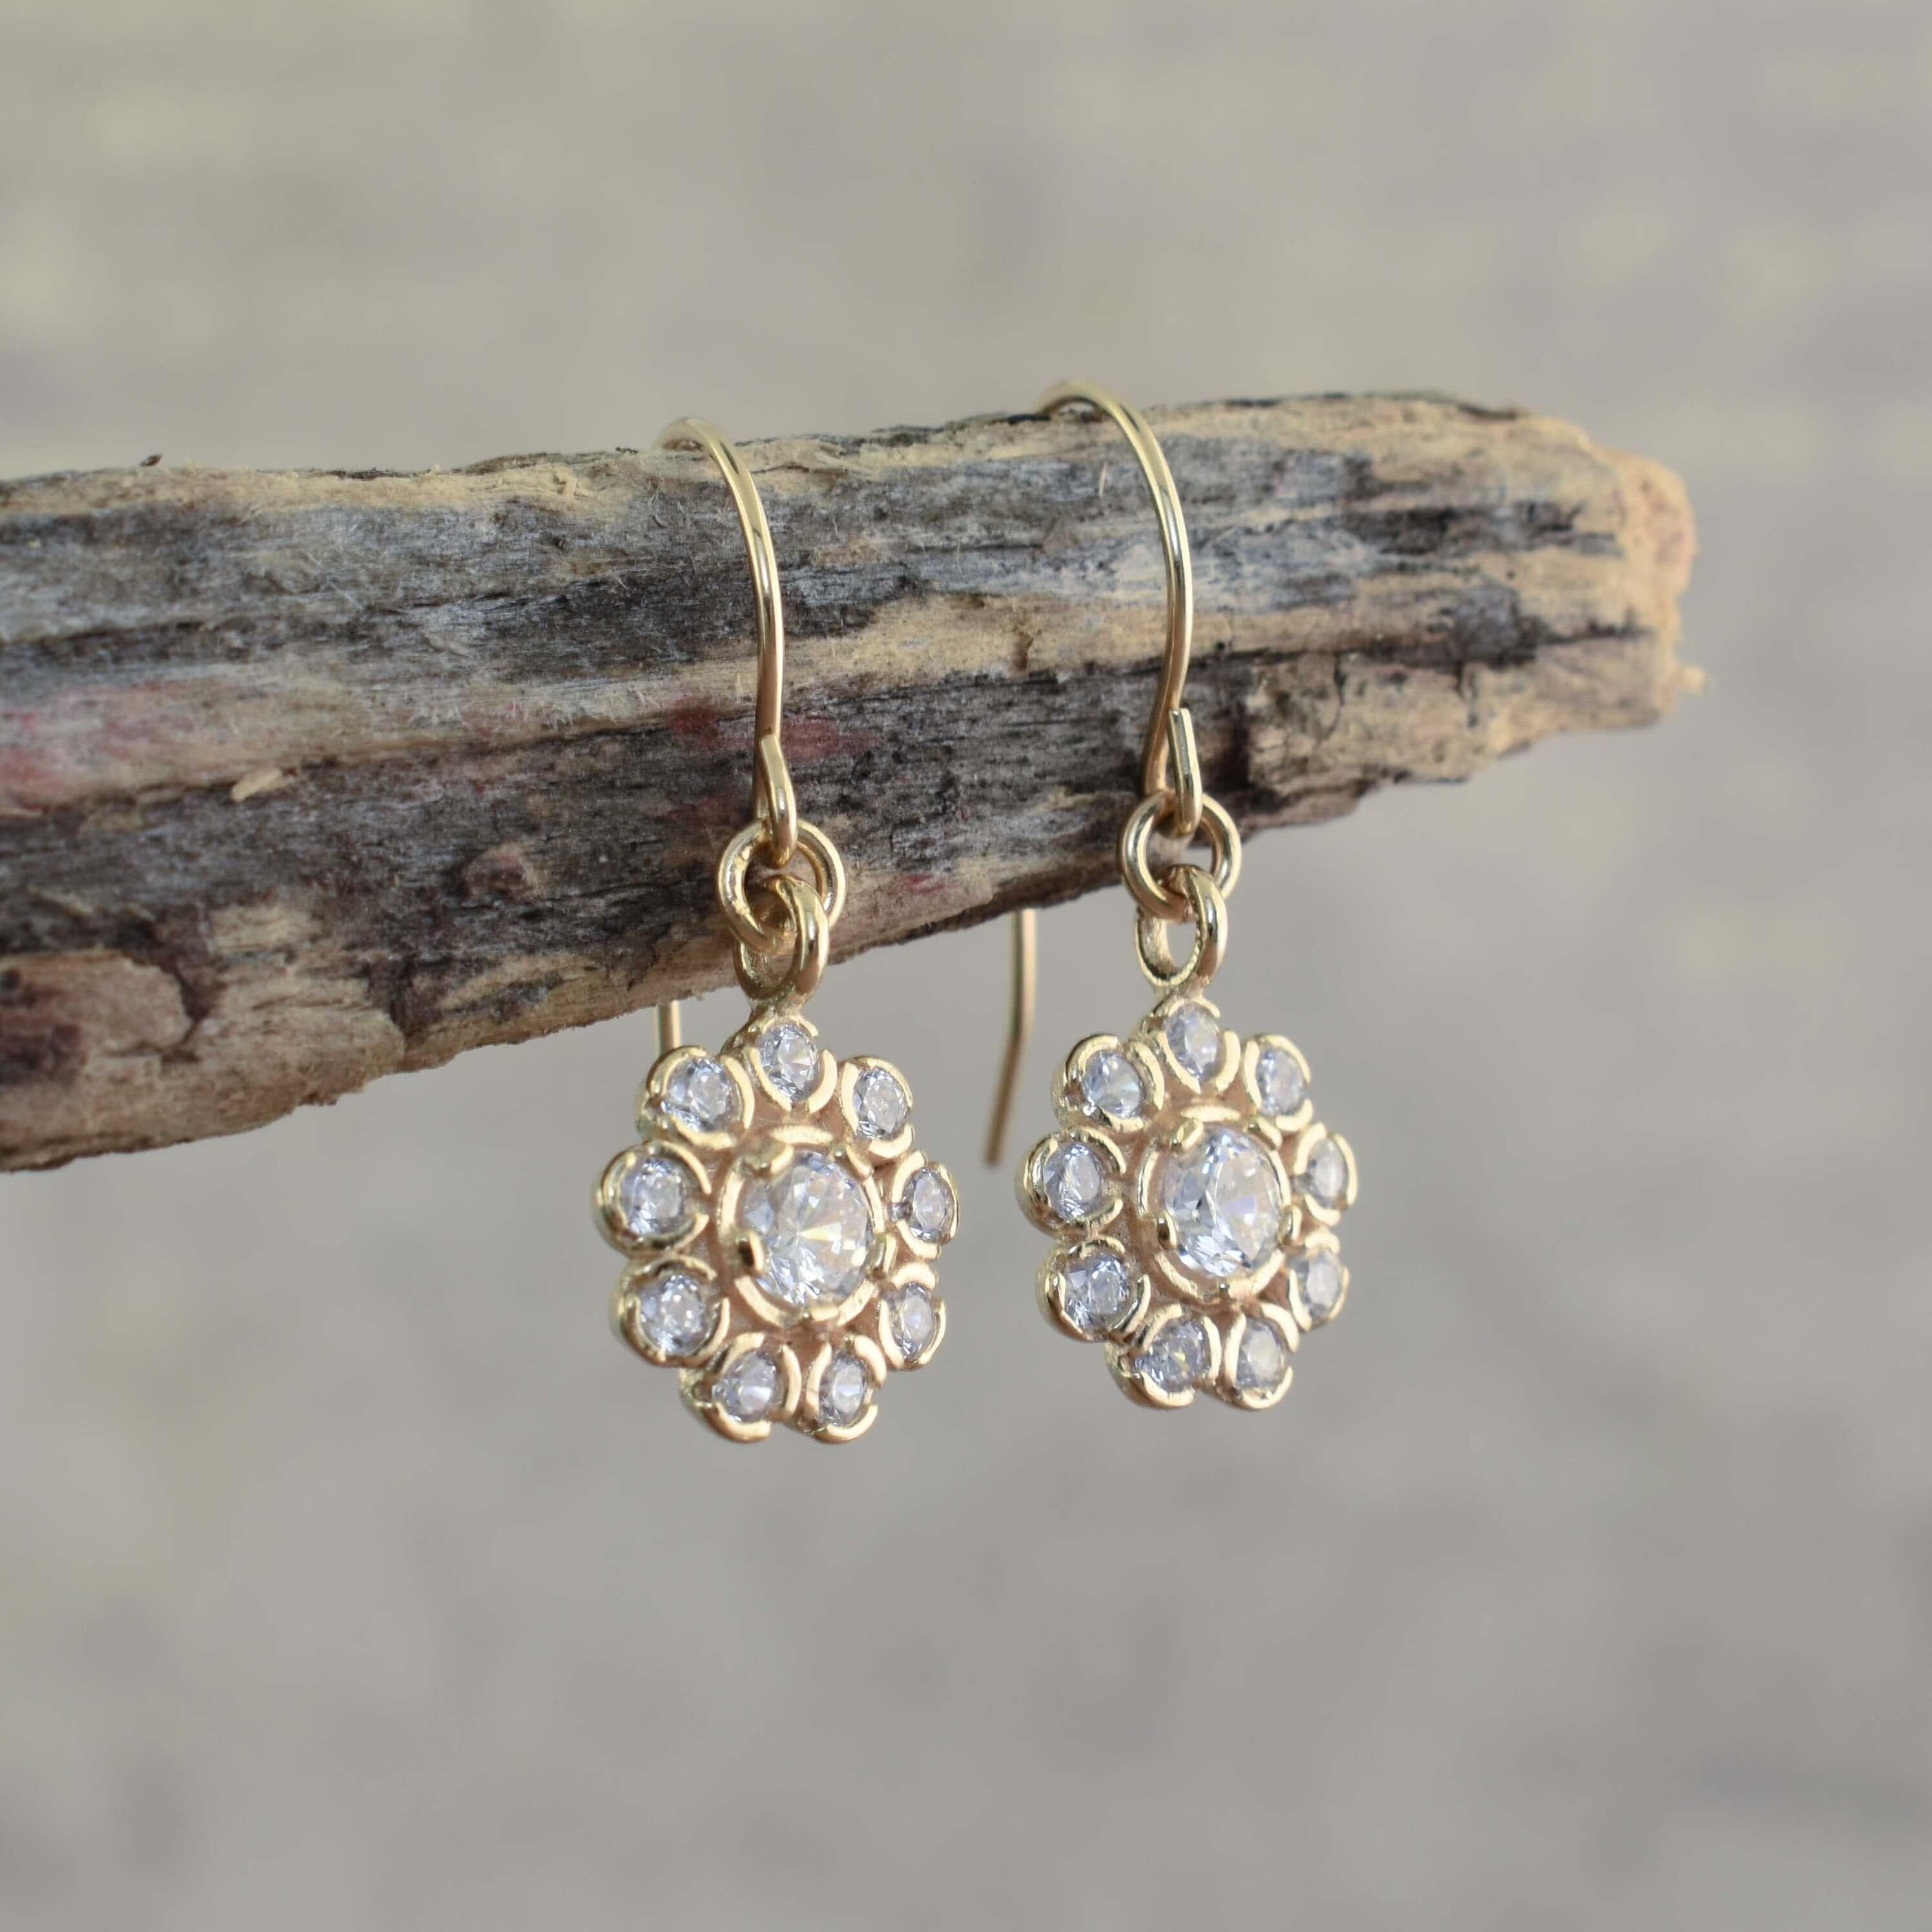 Lit'l Vintage Earrings in gold vermeil and CZ